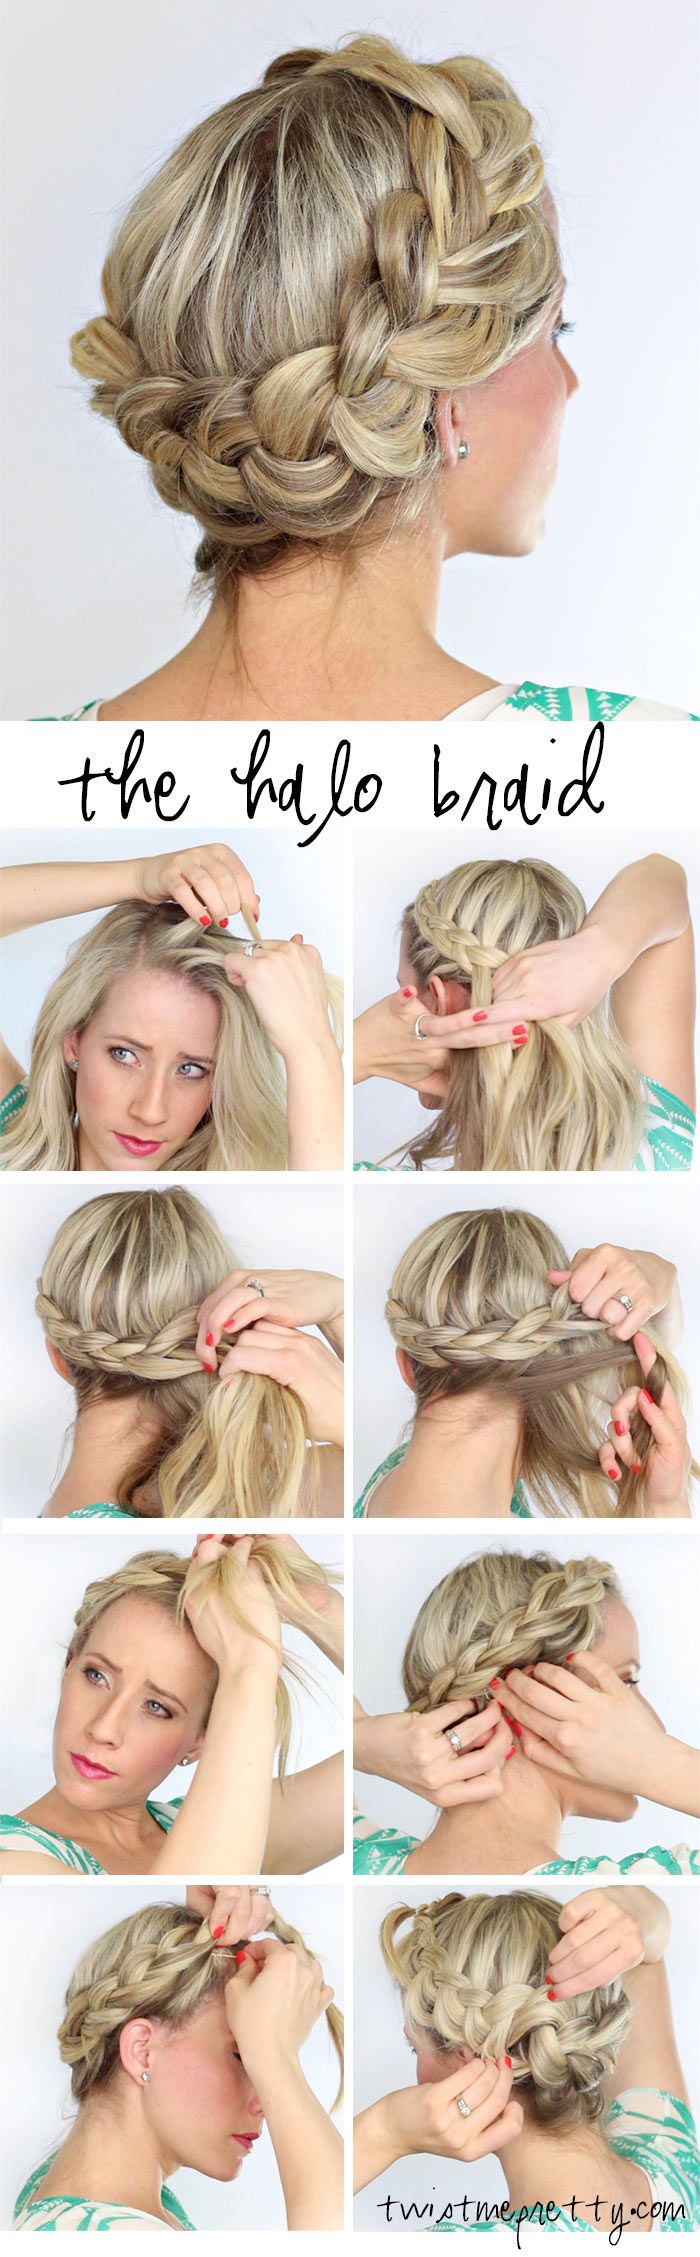 Bring The Spring Early With These Romantic Hair Braids